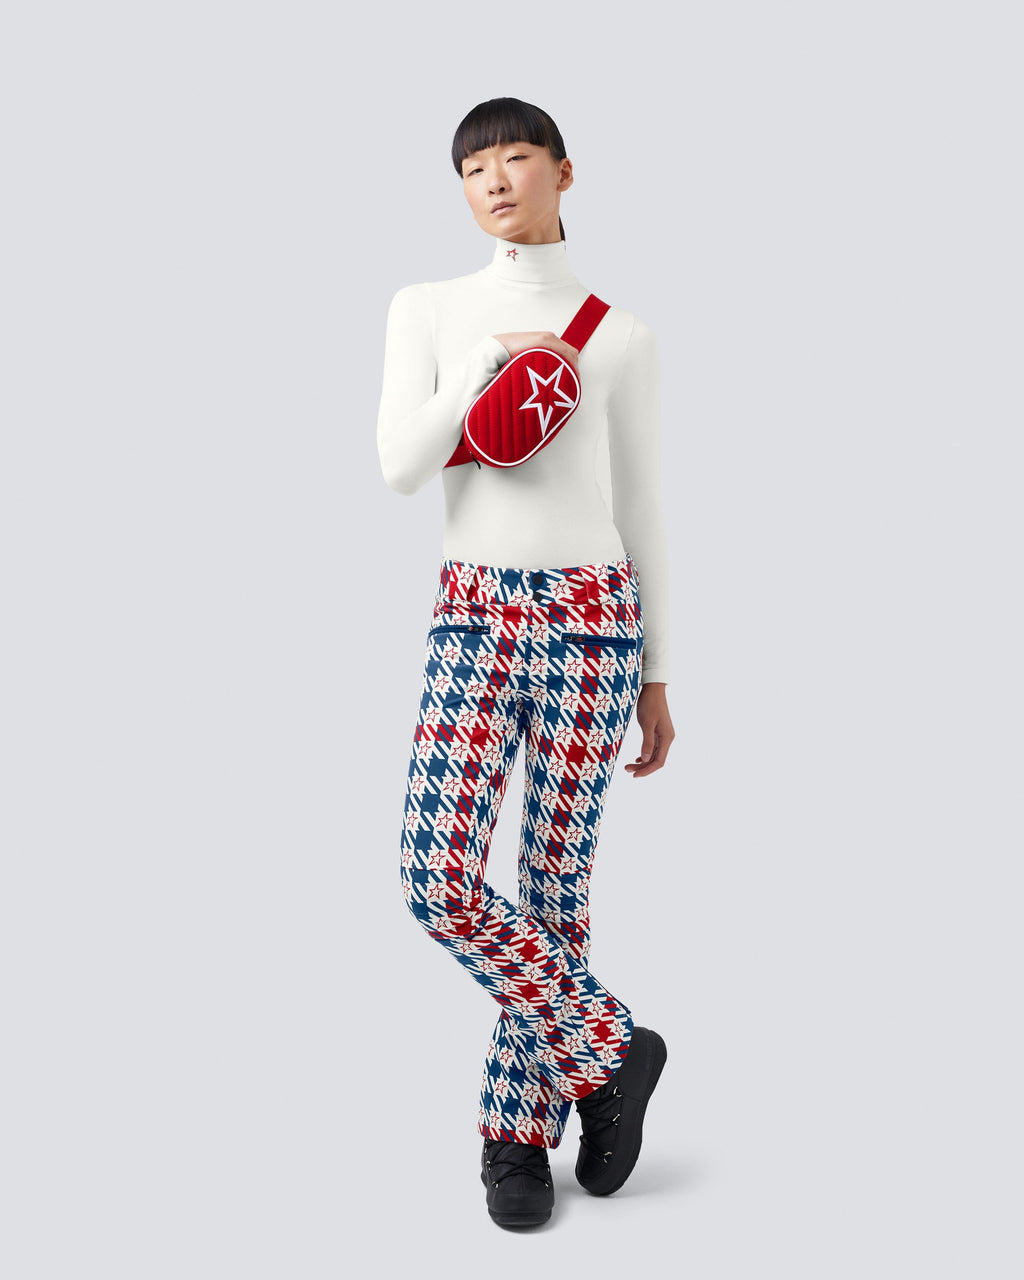 Aurora Flare Pant in Star Gingham Snow White